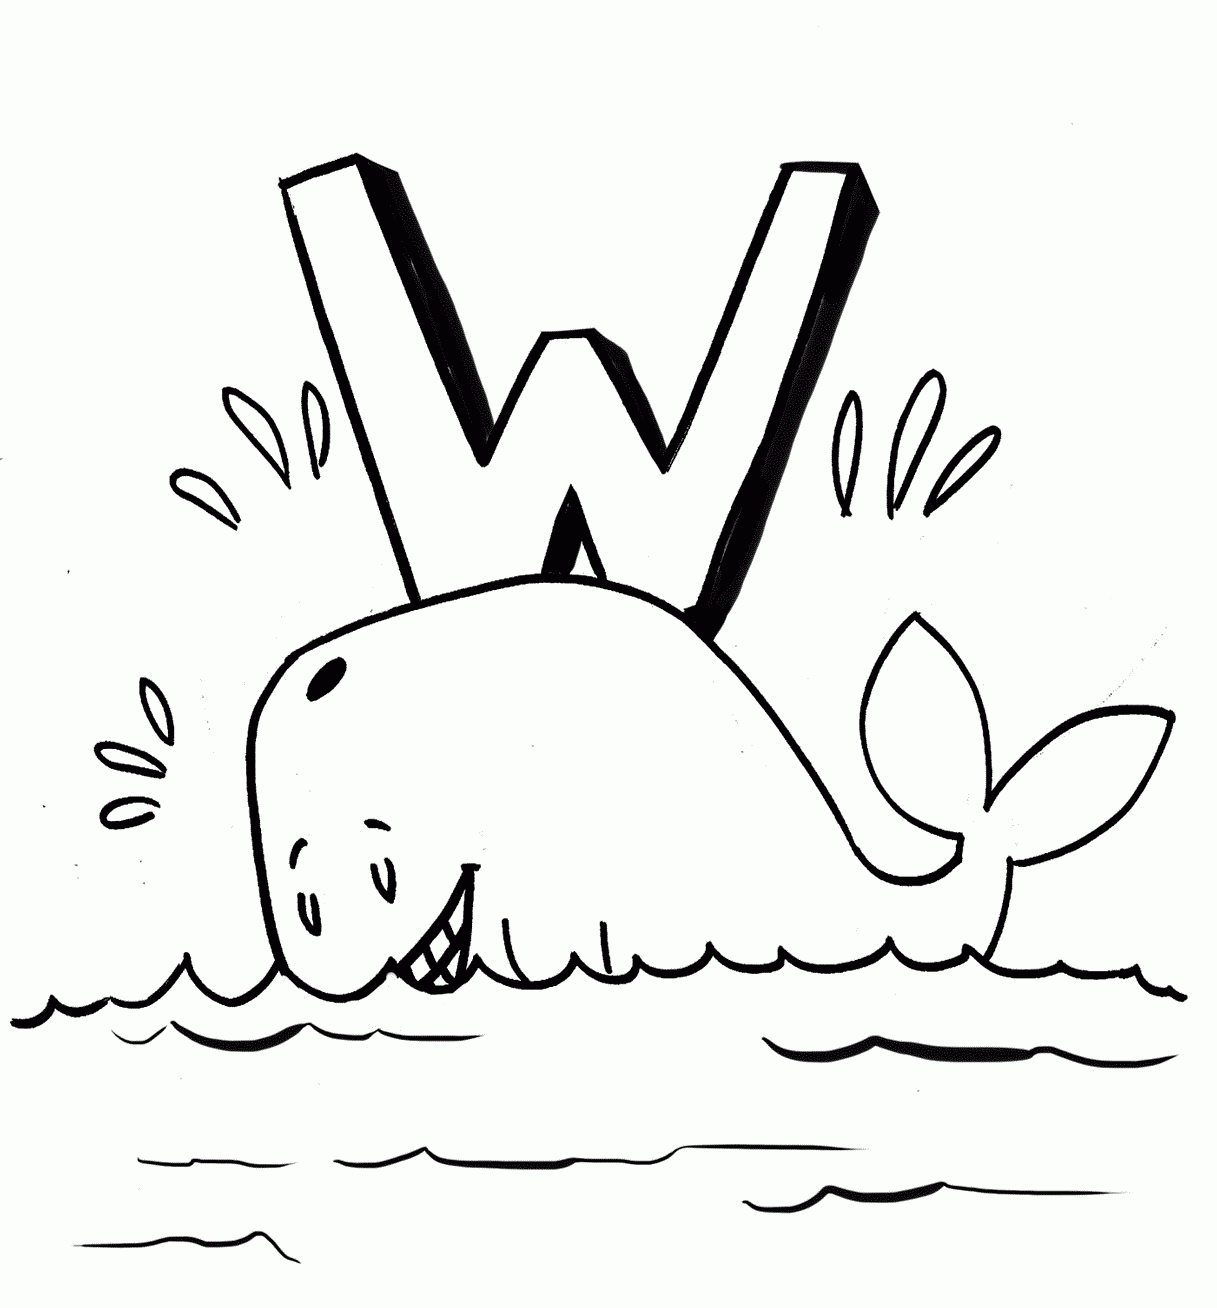 Free Printable Whale Coloring Pages For Kids - Free Printable Whale Coloring Pages